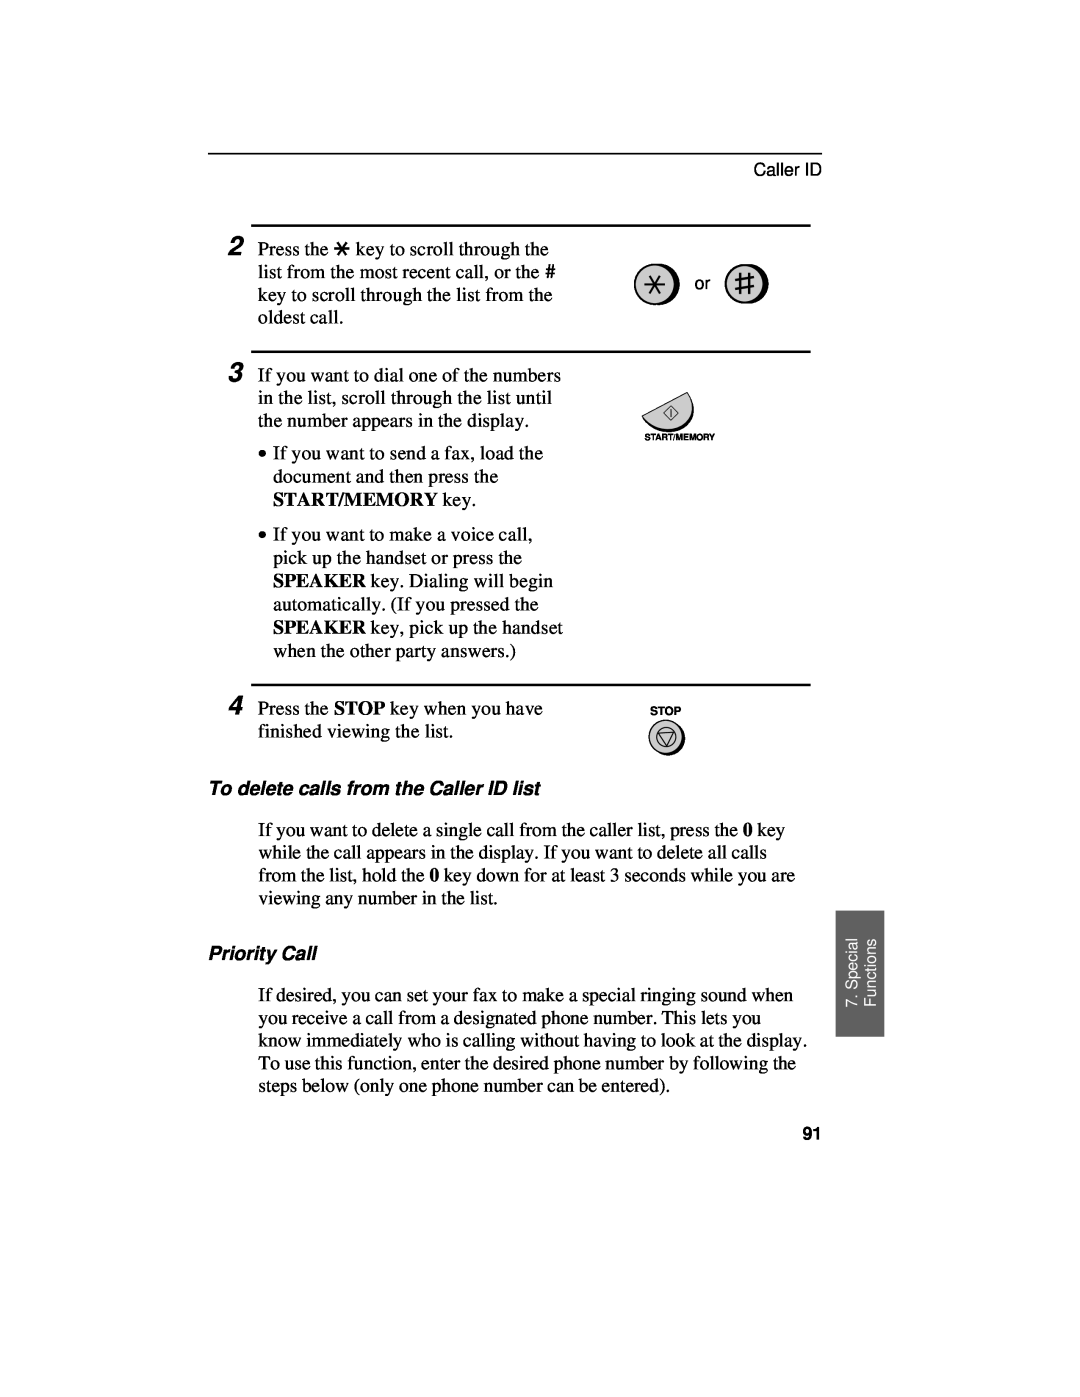 Sharp UX-460 operation manual To delete calls from the Caller ID list, Priority Call 